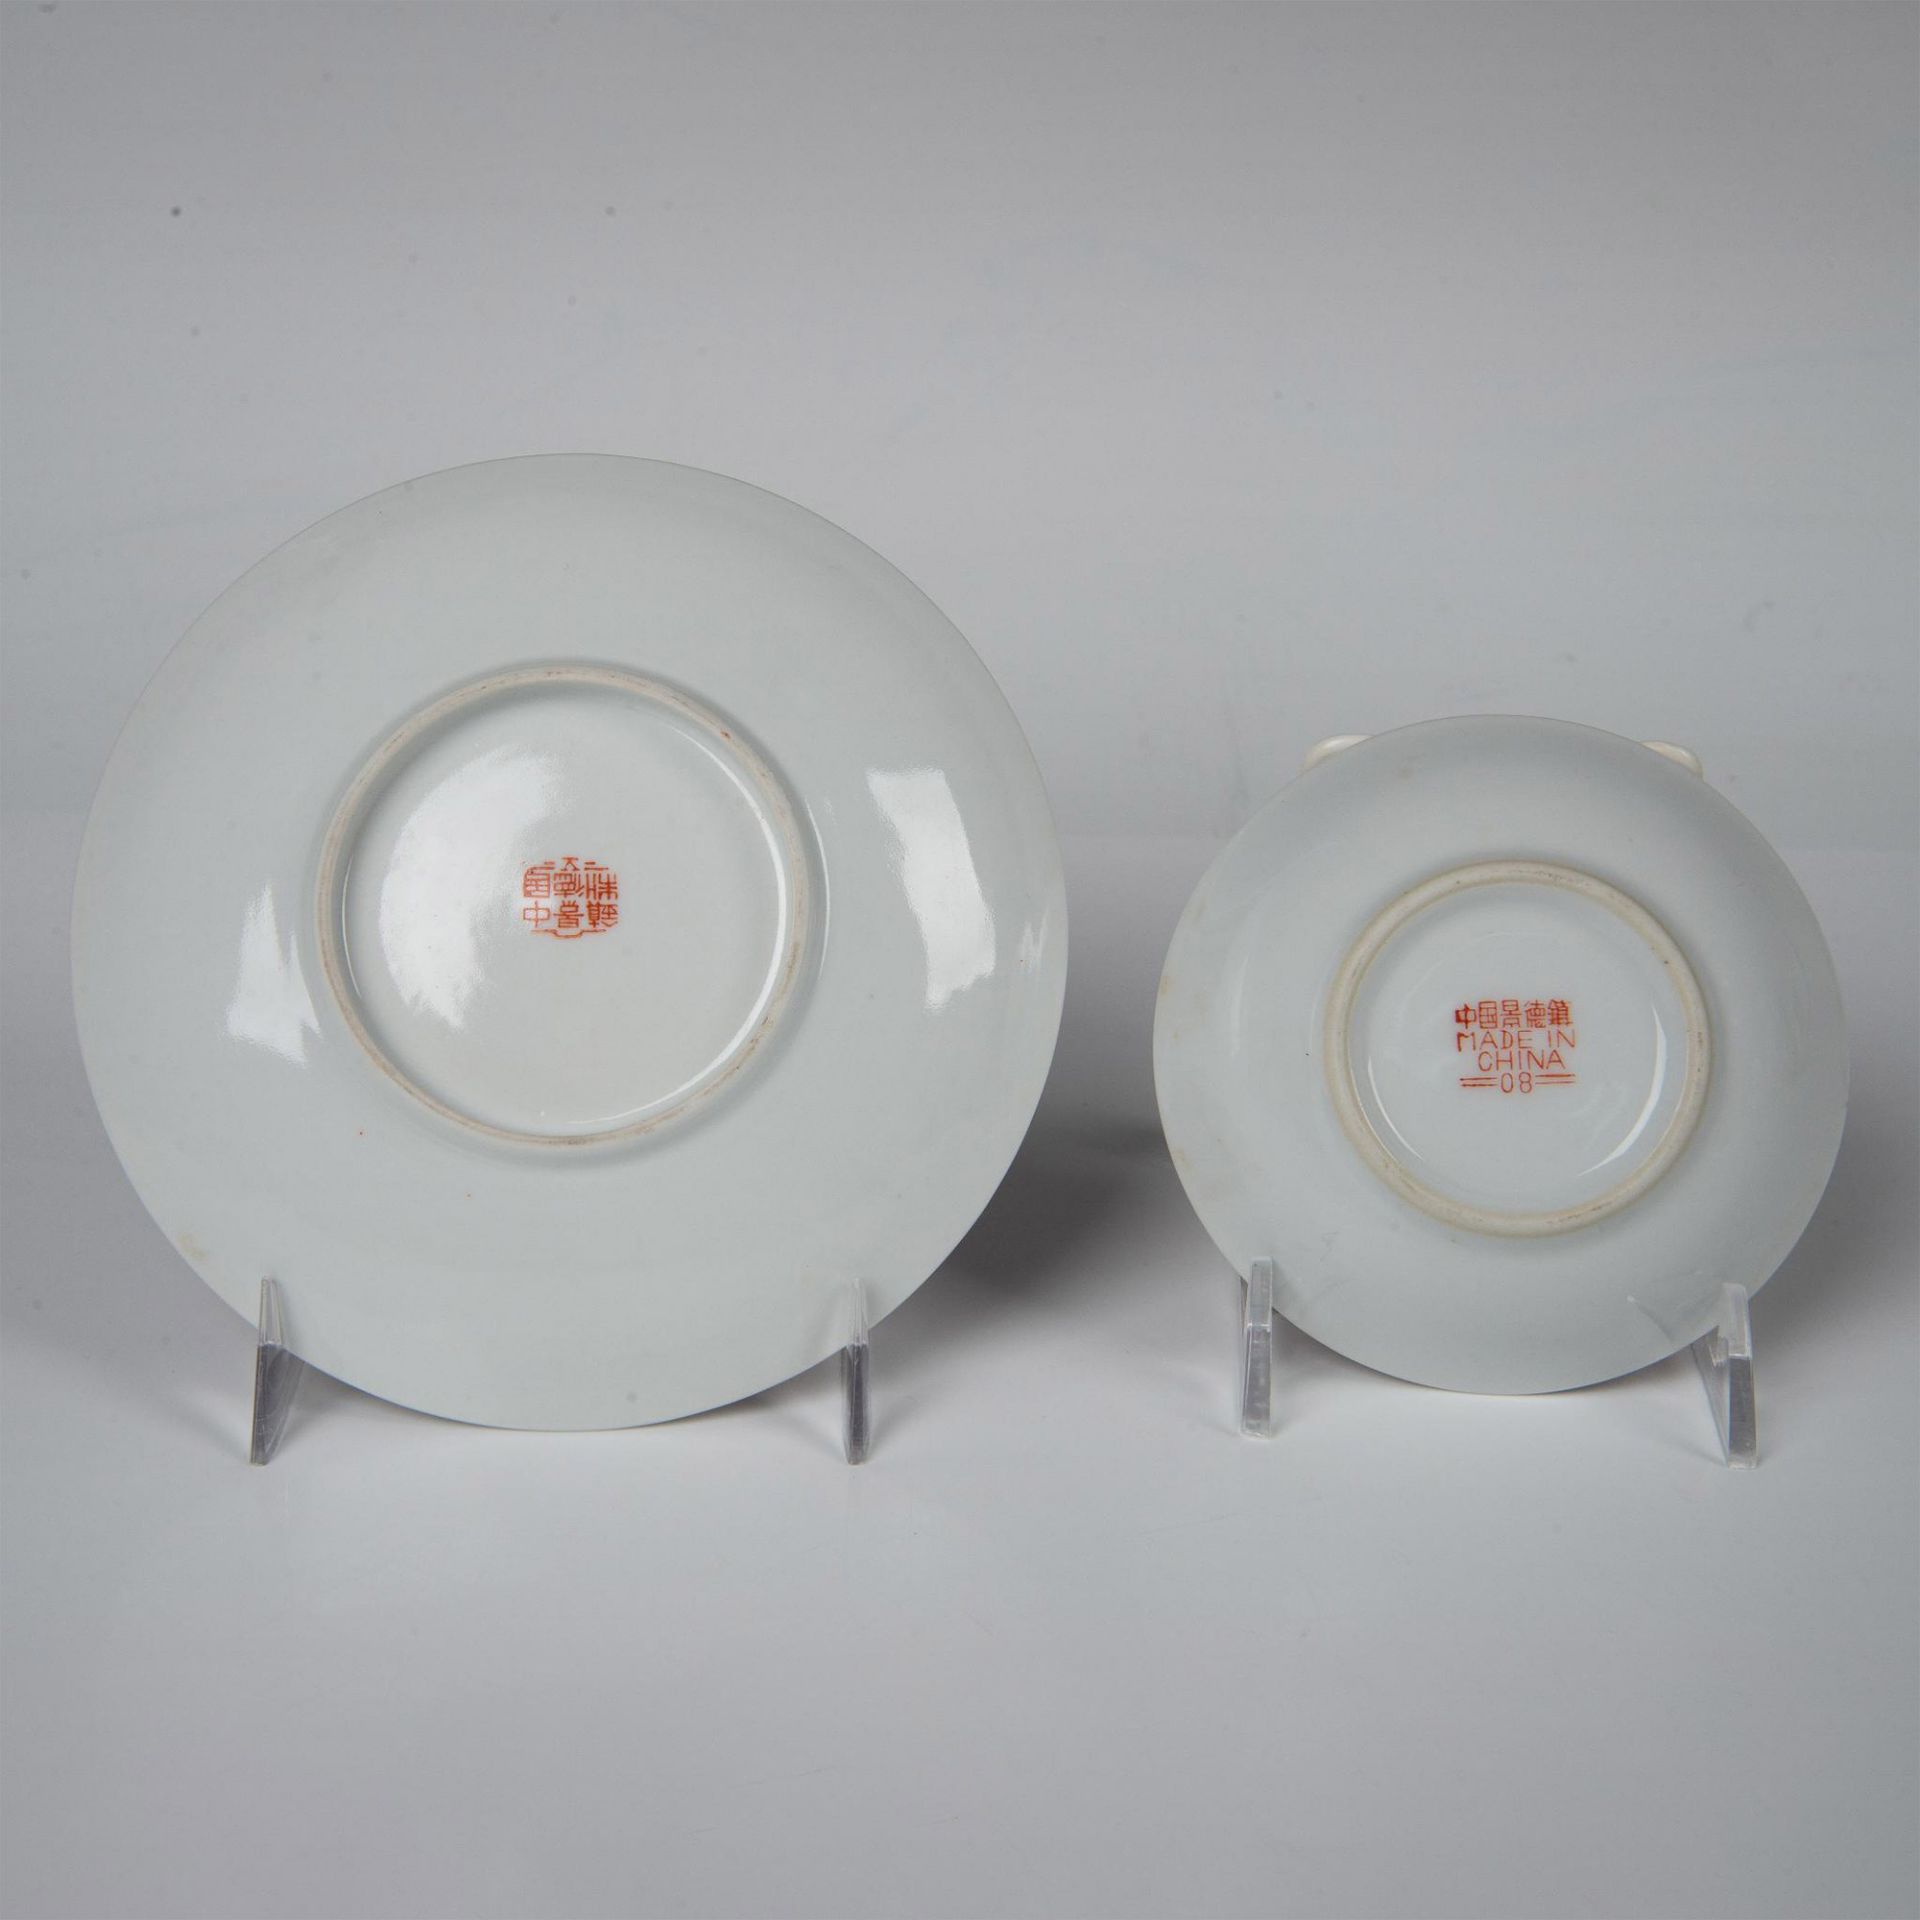 8pc Chinese Porcelain Serving Set - Image 5 of 9